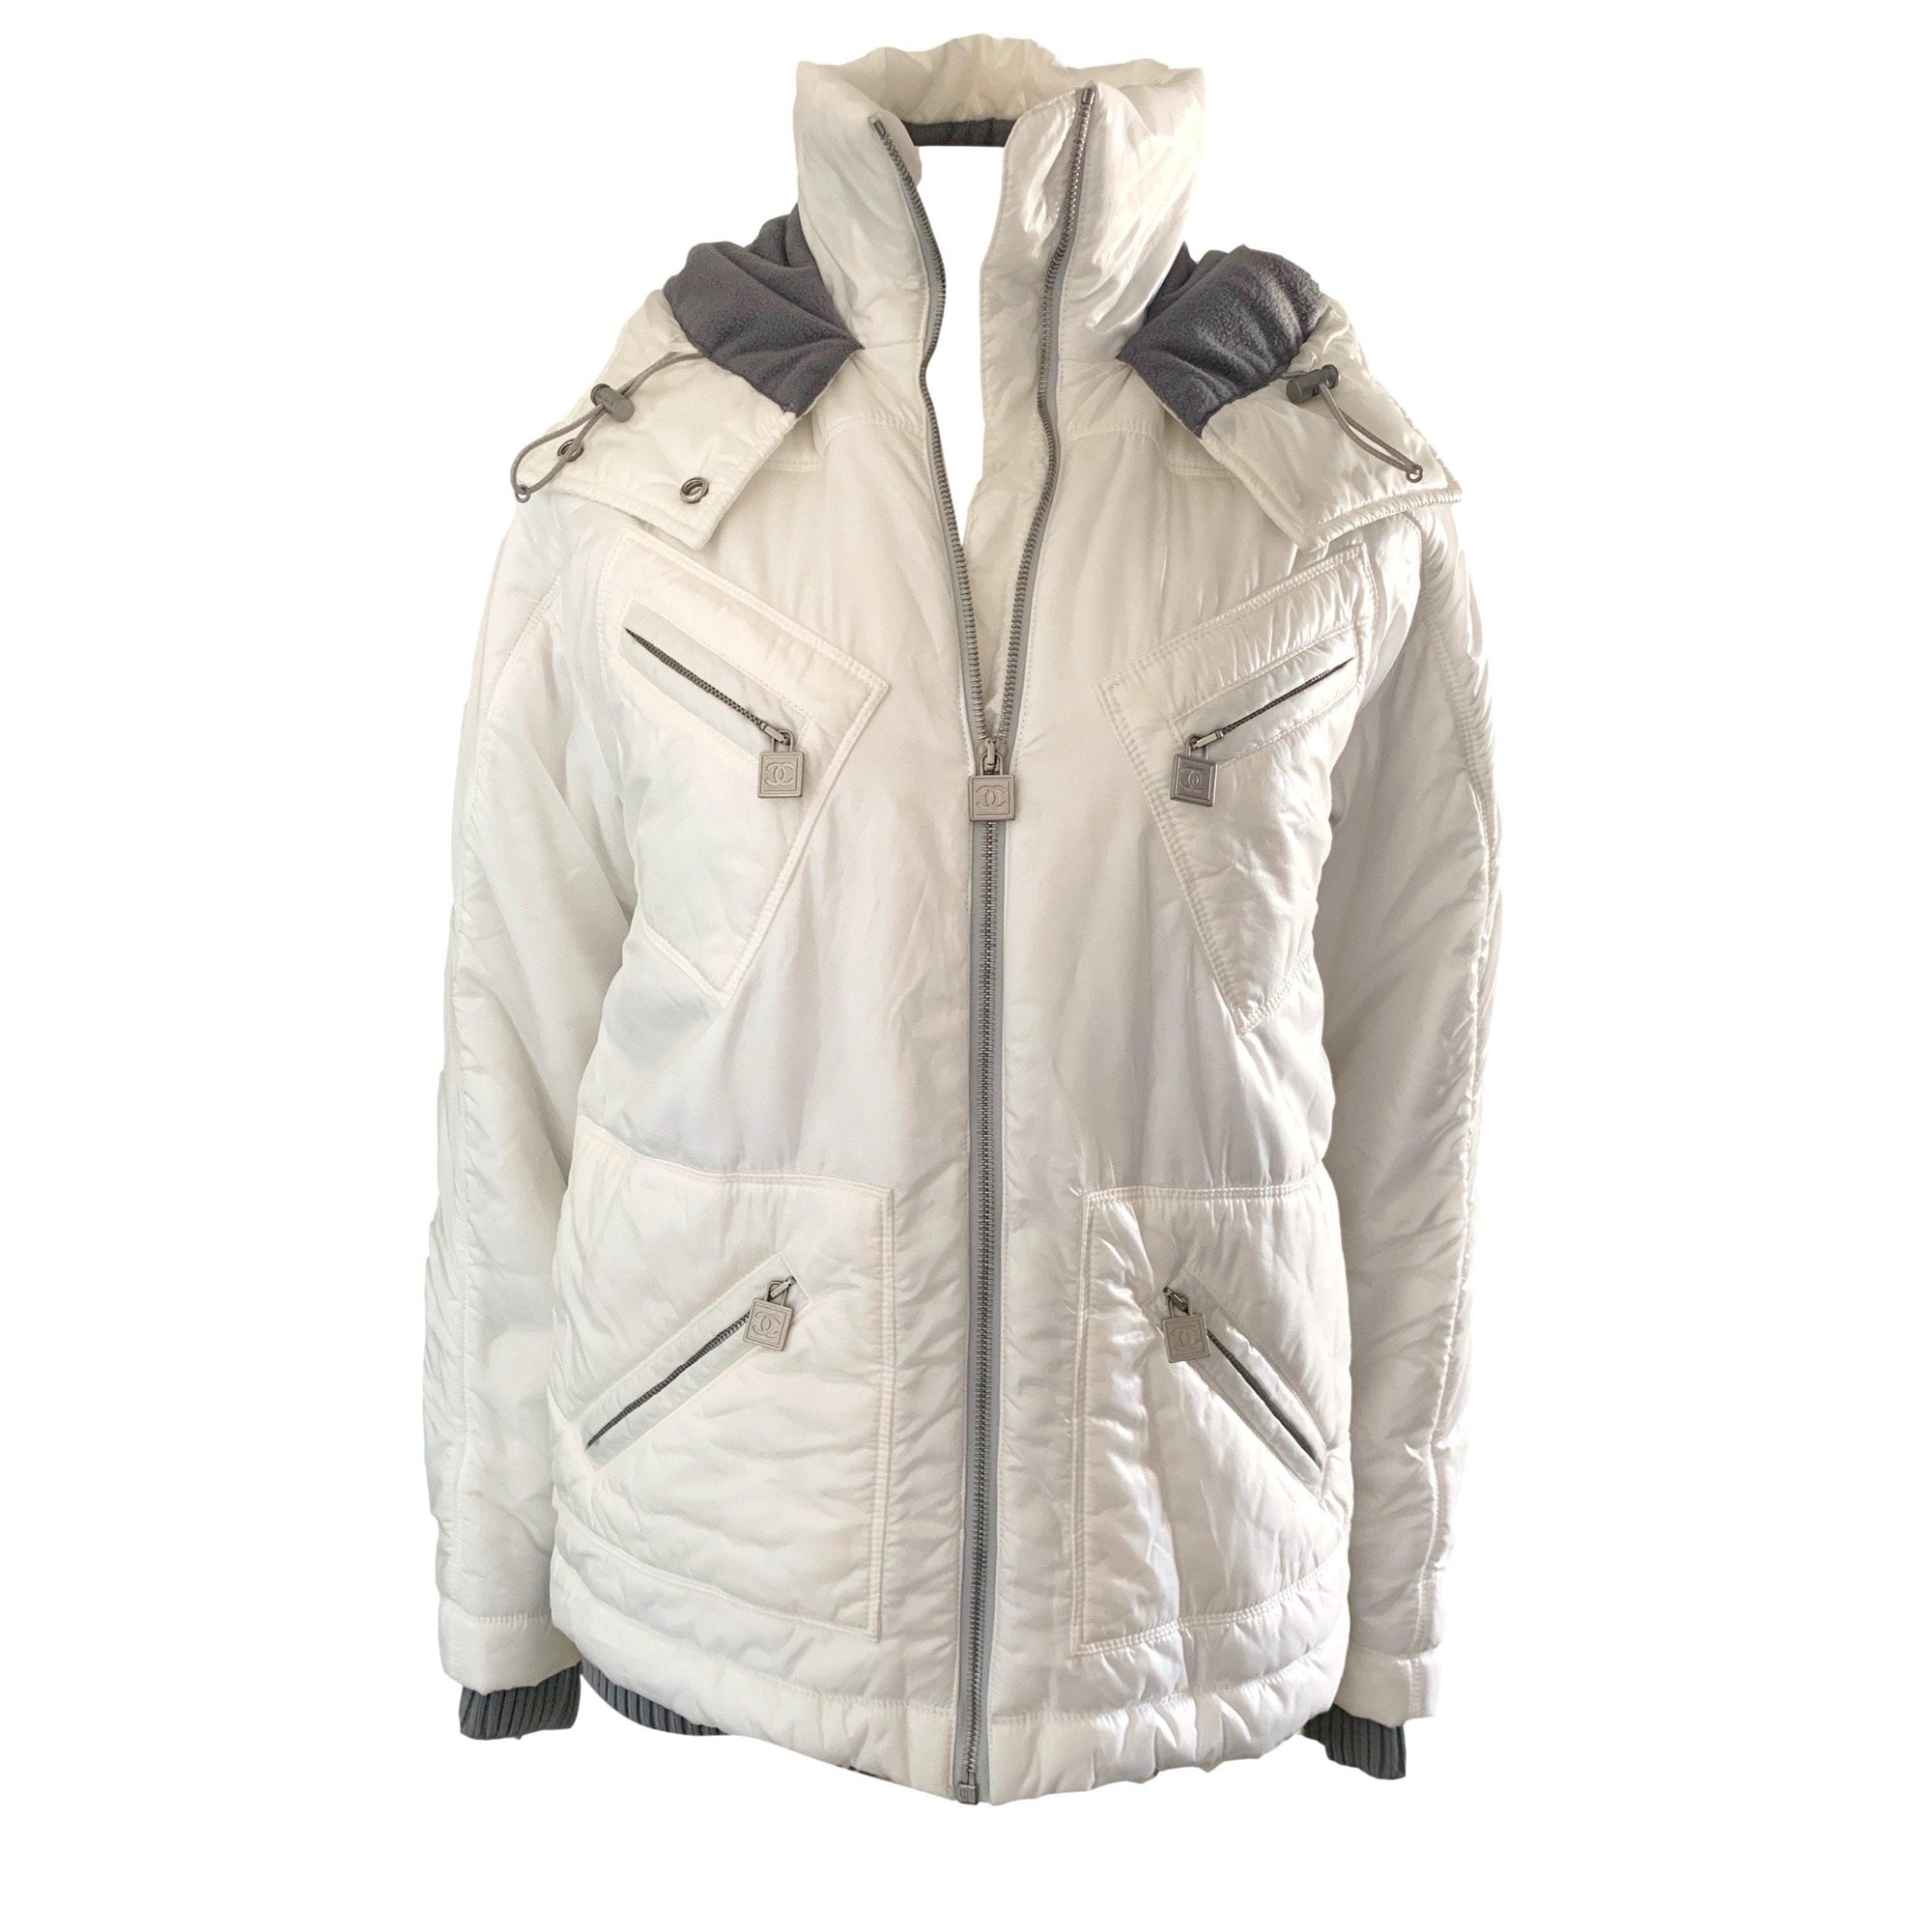 Chanel Pearl White Puffer Jacket - Apparel